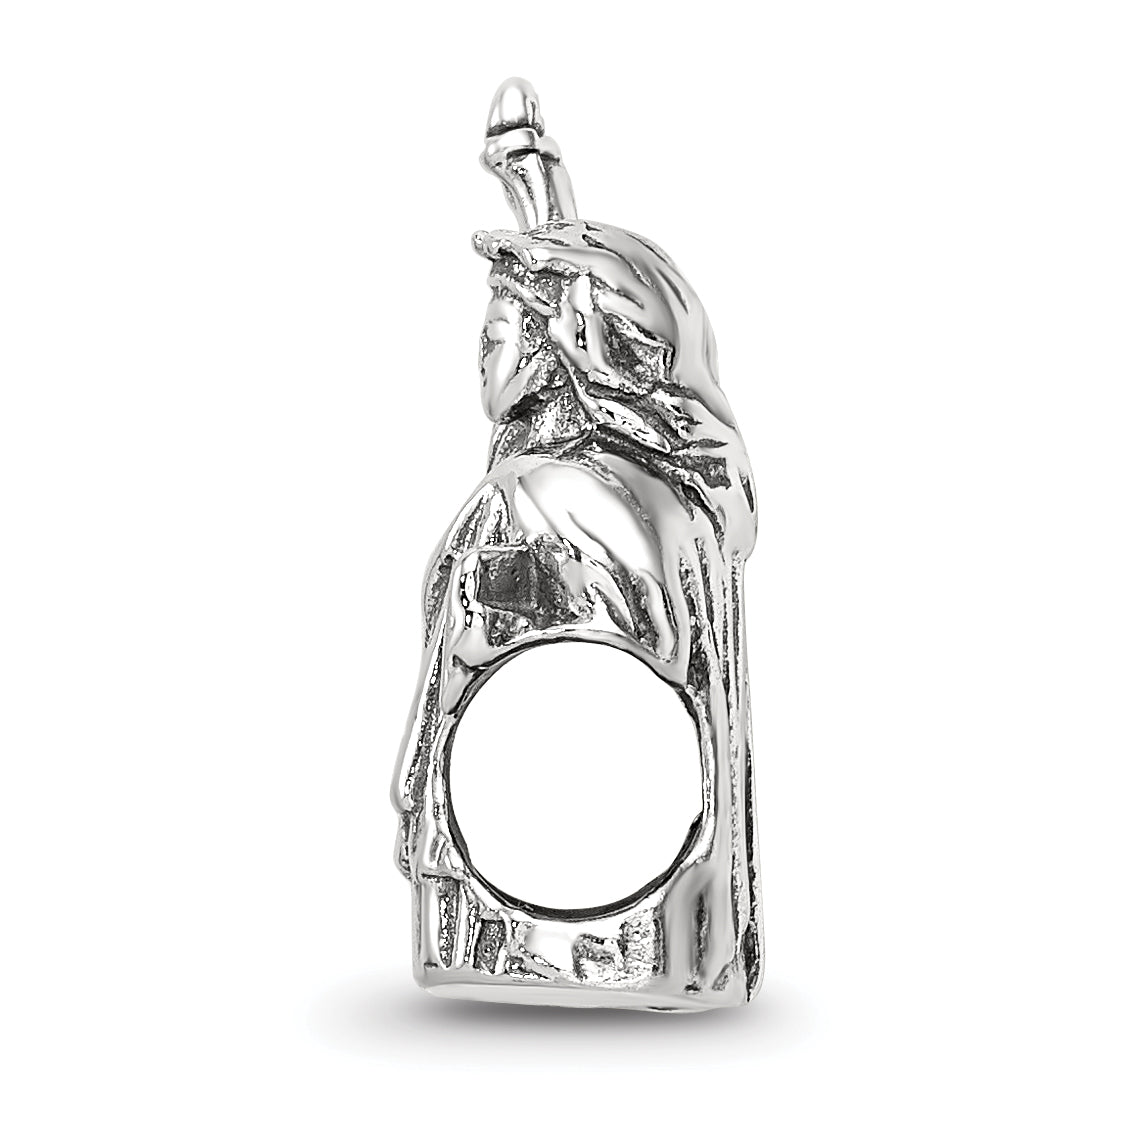 Sterling Silver Reflections Statue of Liberty Bead